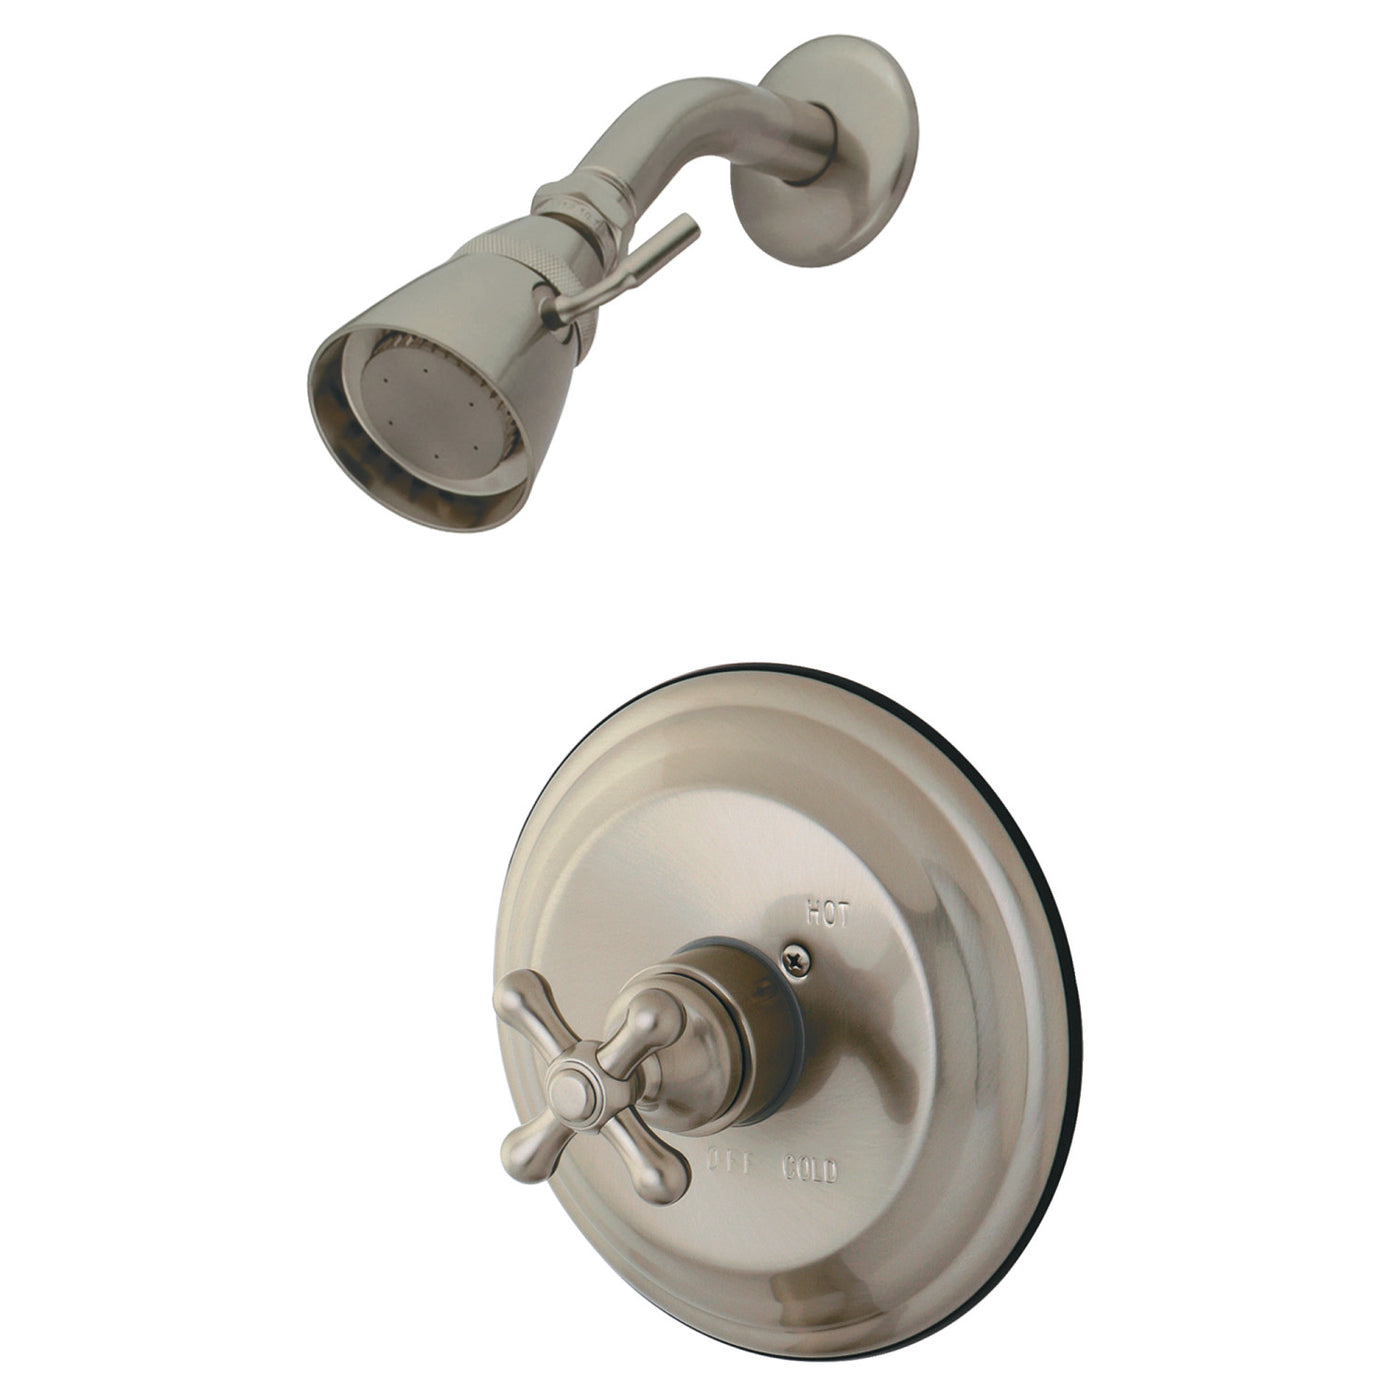 Elements of Design EB3638AXSO Pressure Balanced Shower Faucet, Brushed Nickel